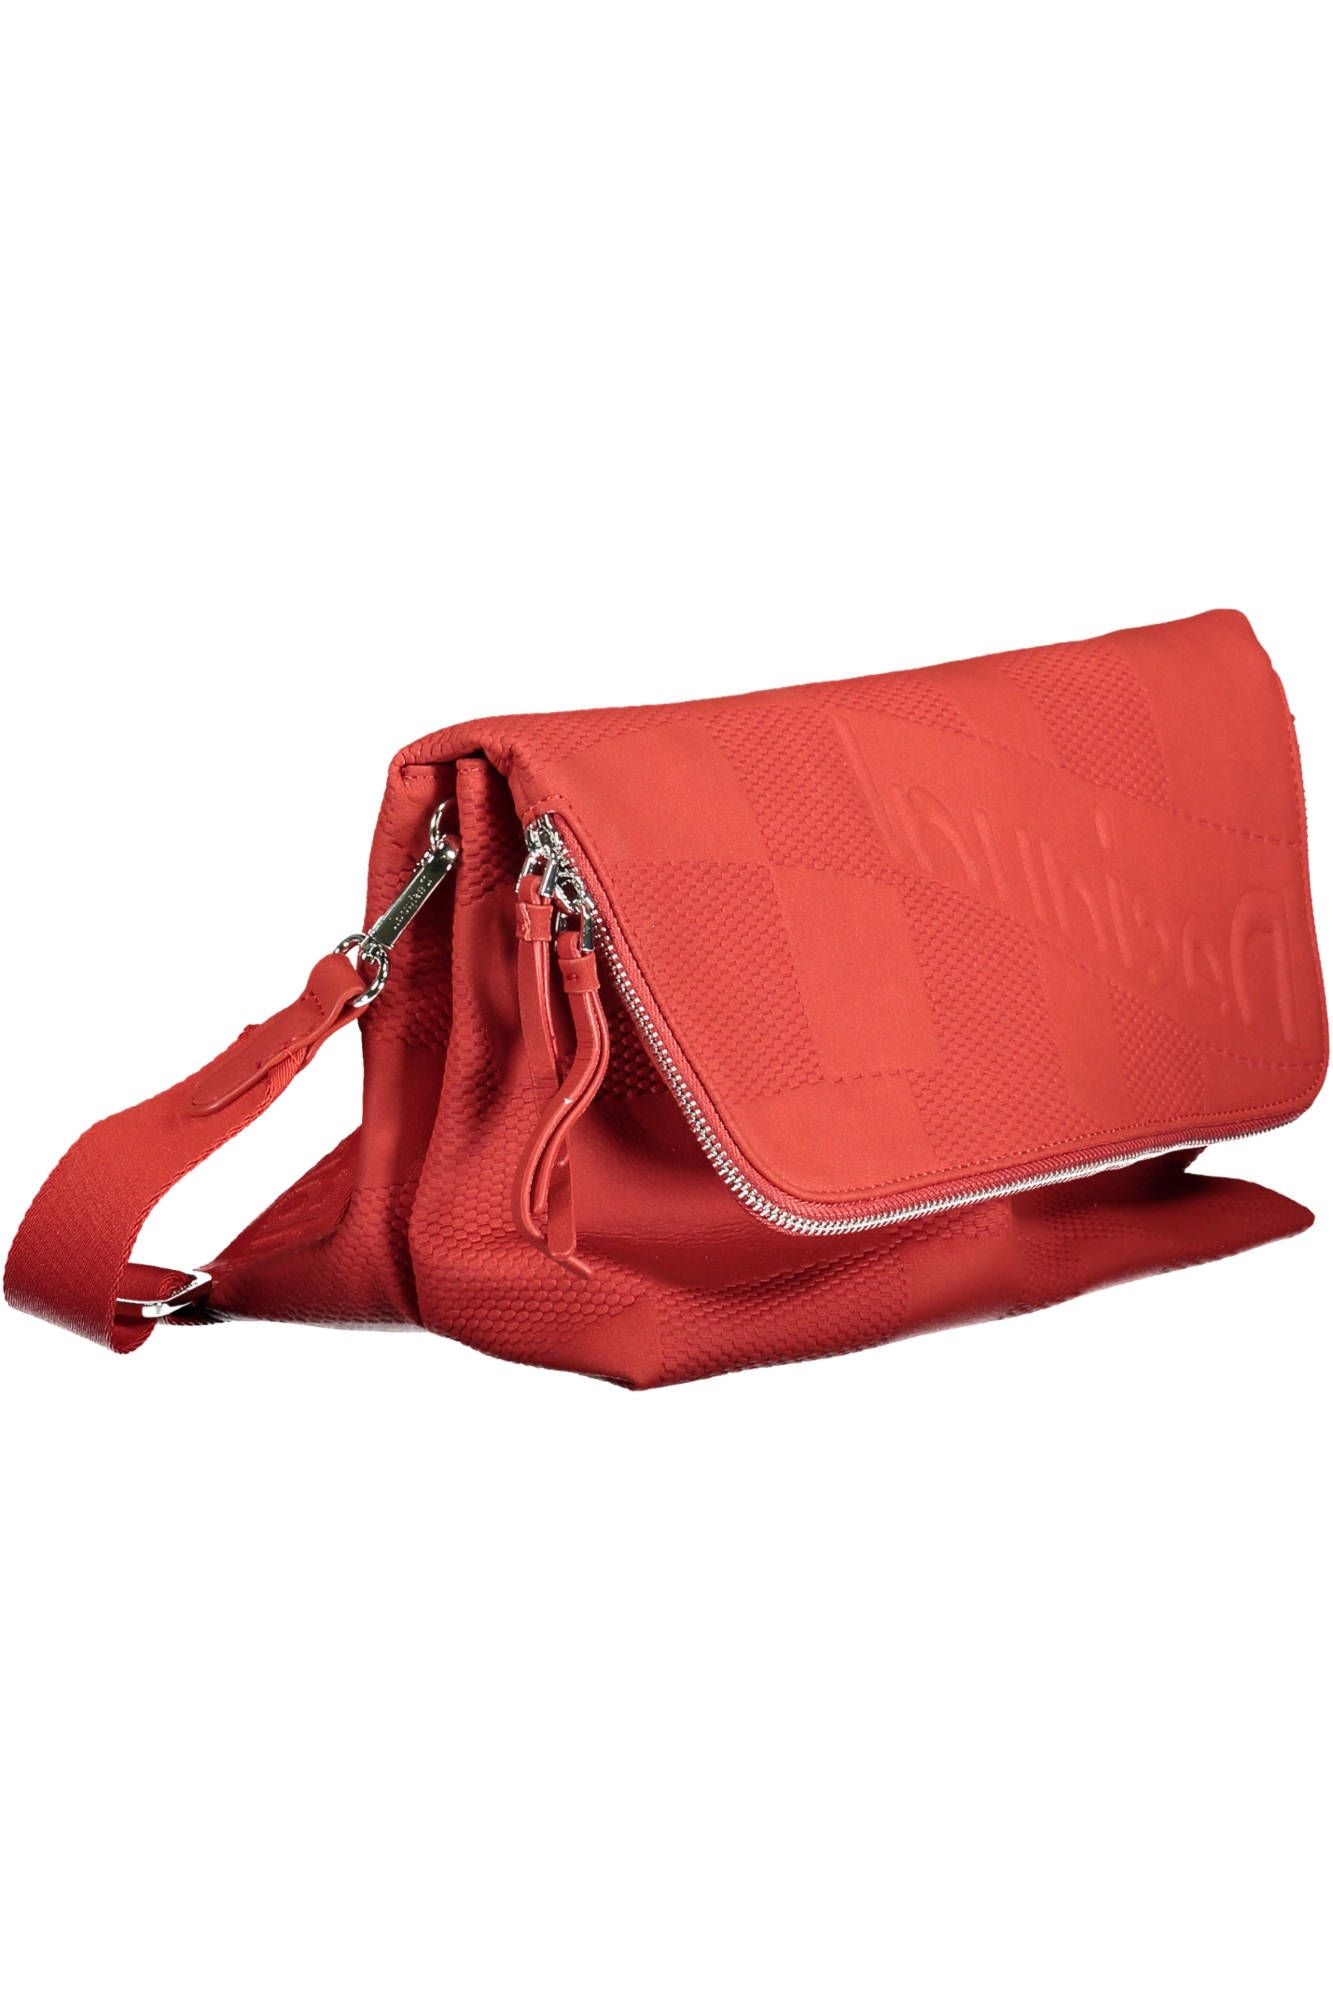 Chic Red Polyurethane Handbag with Multiple Compartments